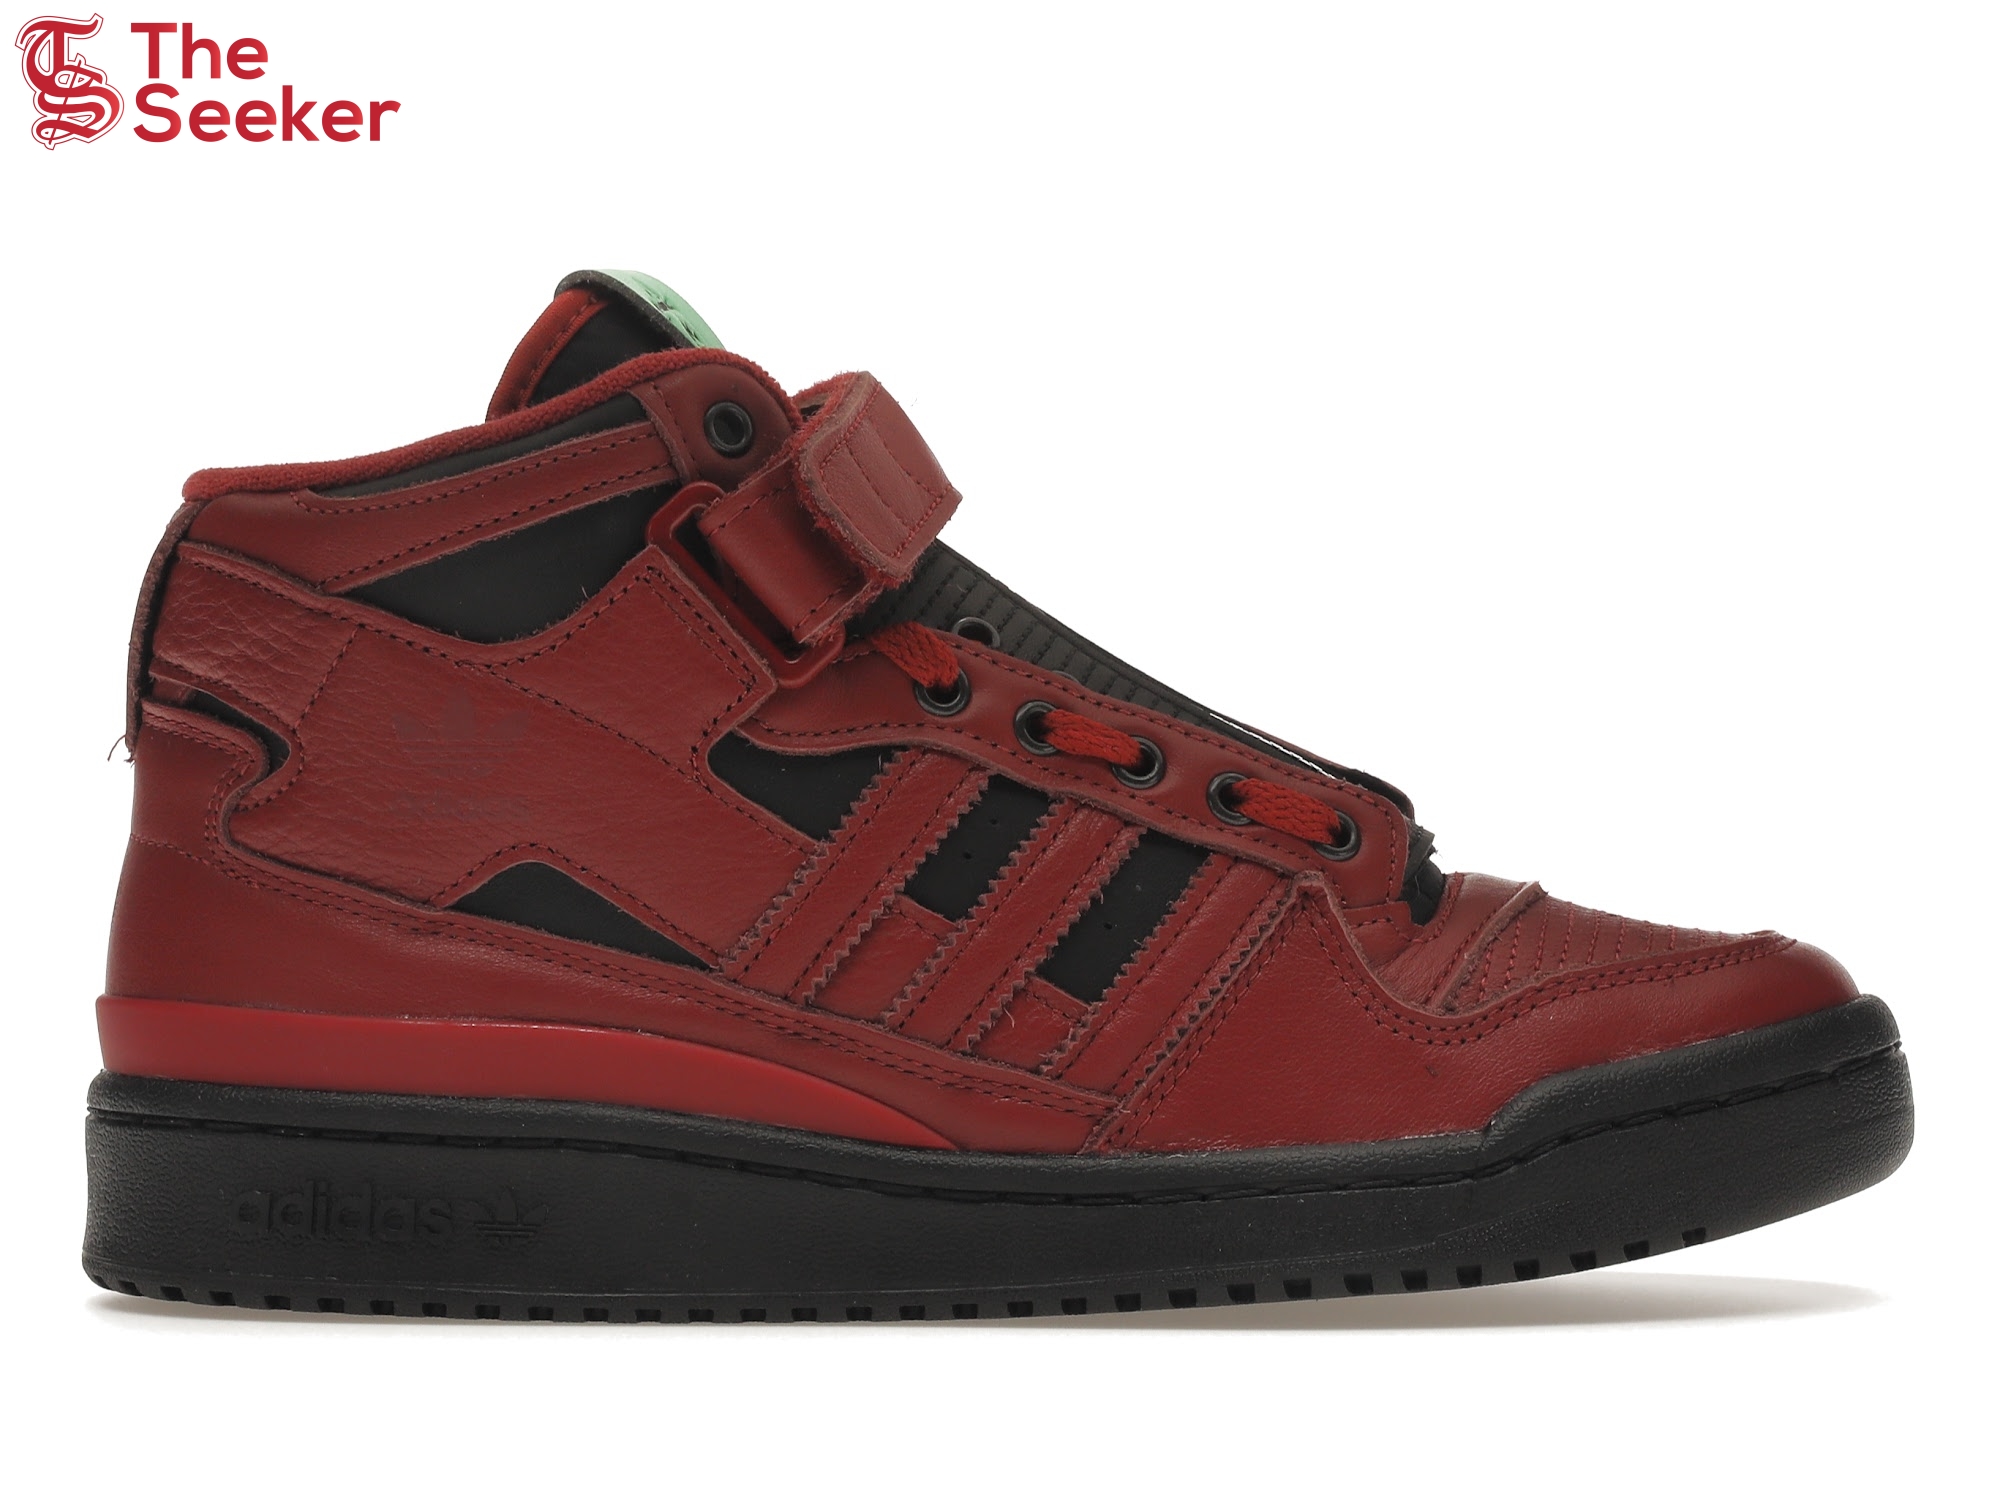 adidas Forum Mid Guardians of the Galaxy Star Lord